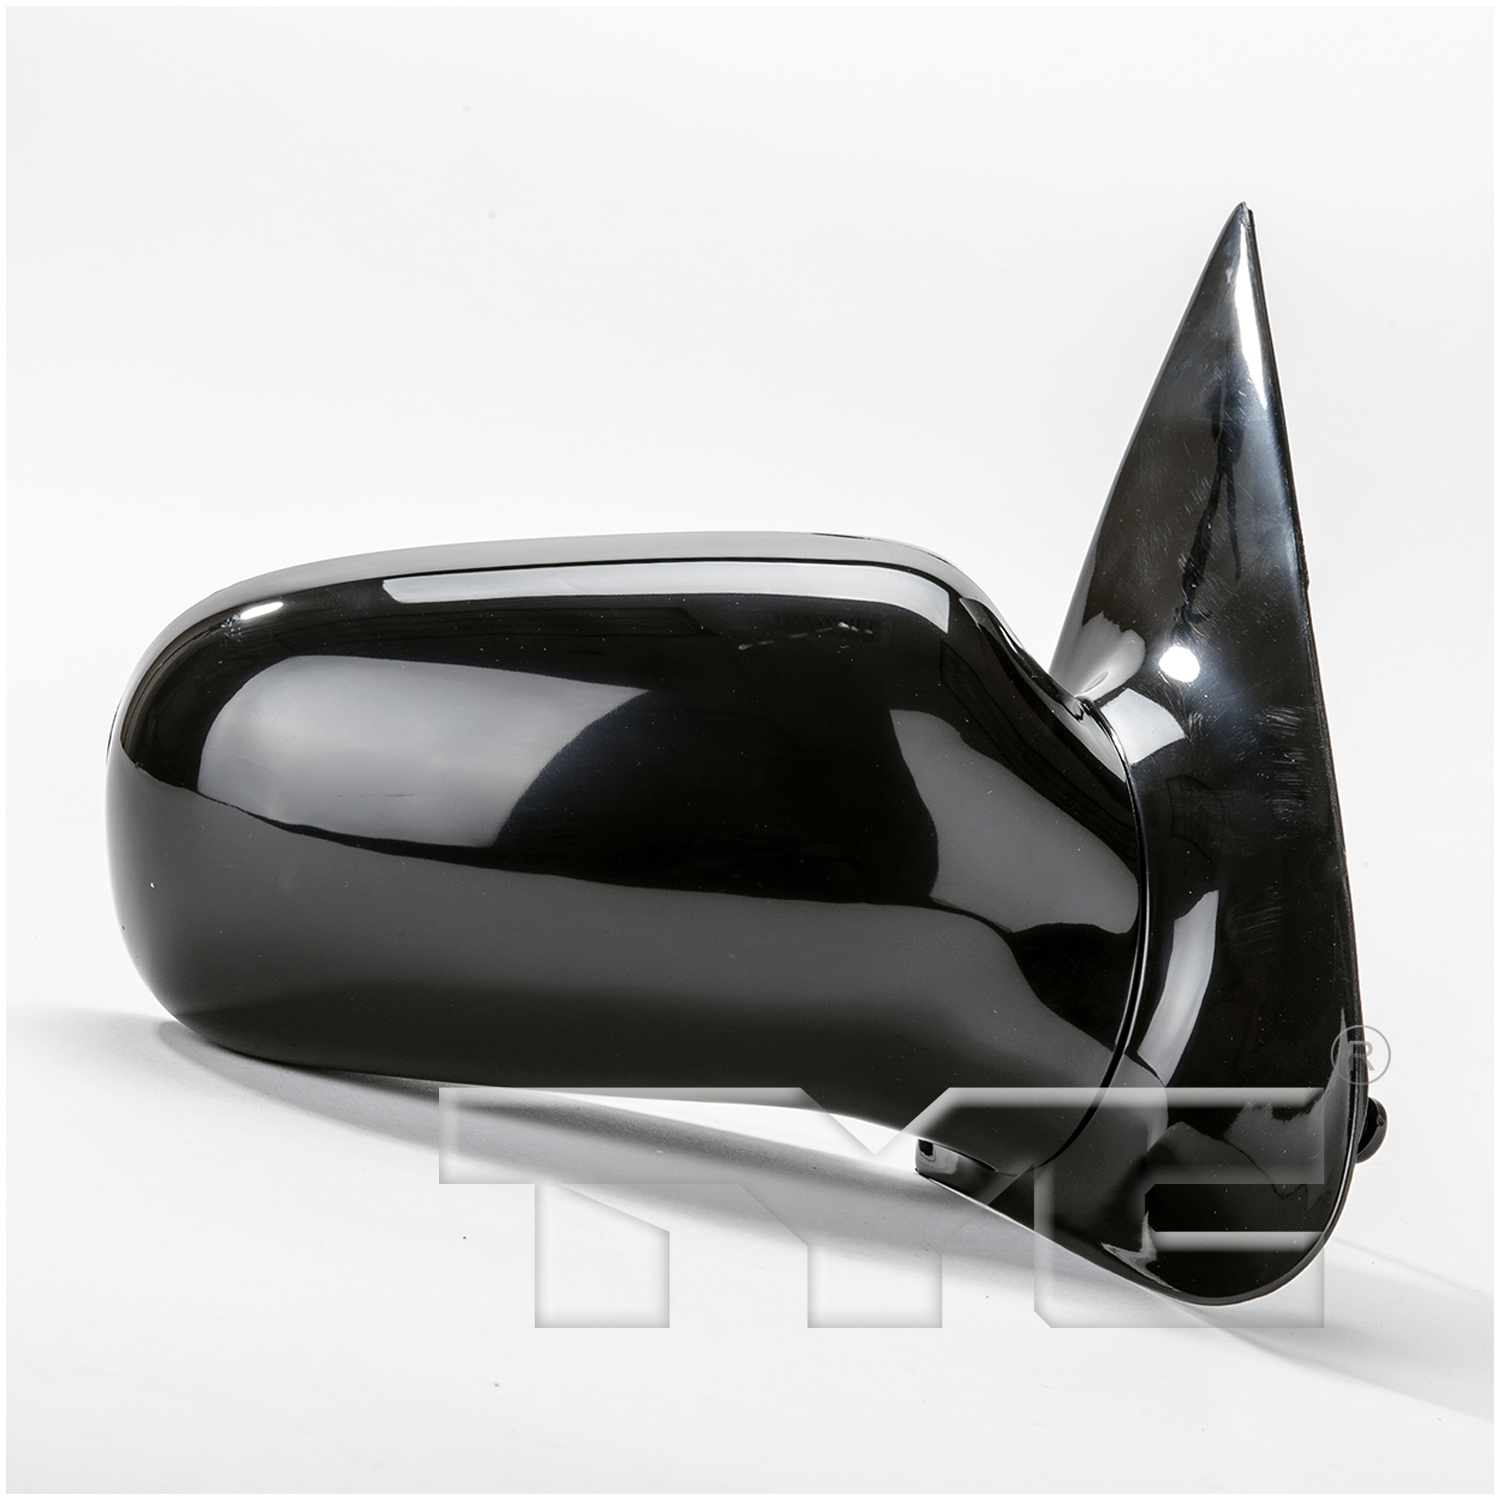 Aftermarket MIRRORS for CHEVROLET - CAVALIER, CAVALIER,95-04,RT Mirror outside rear view